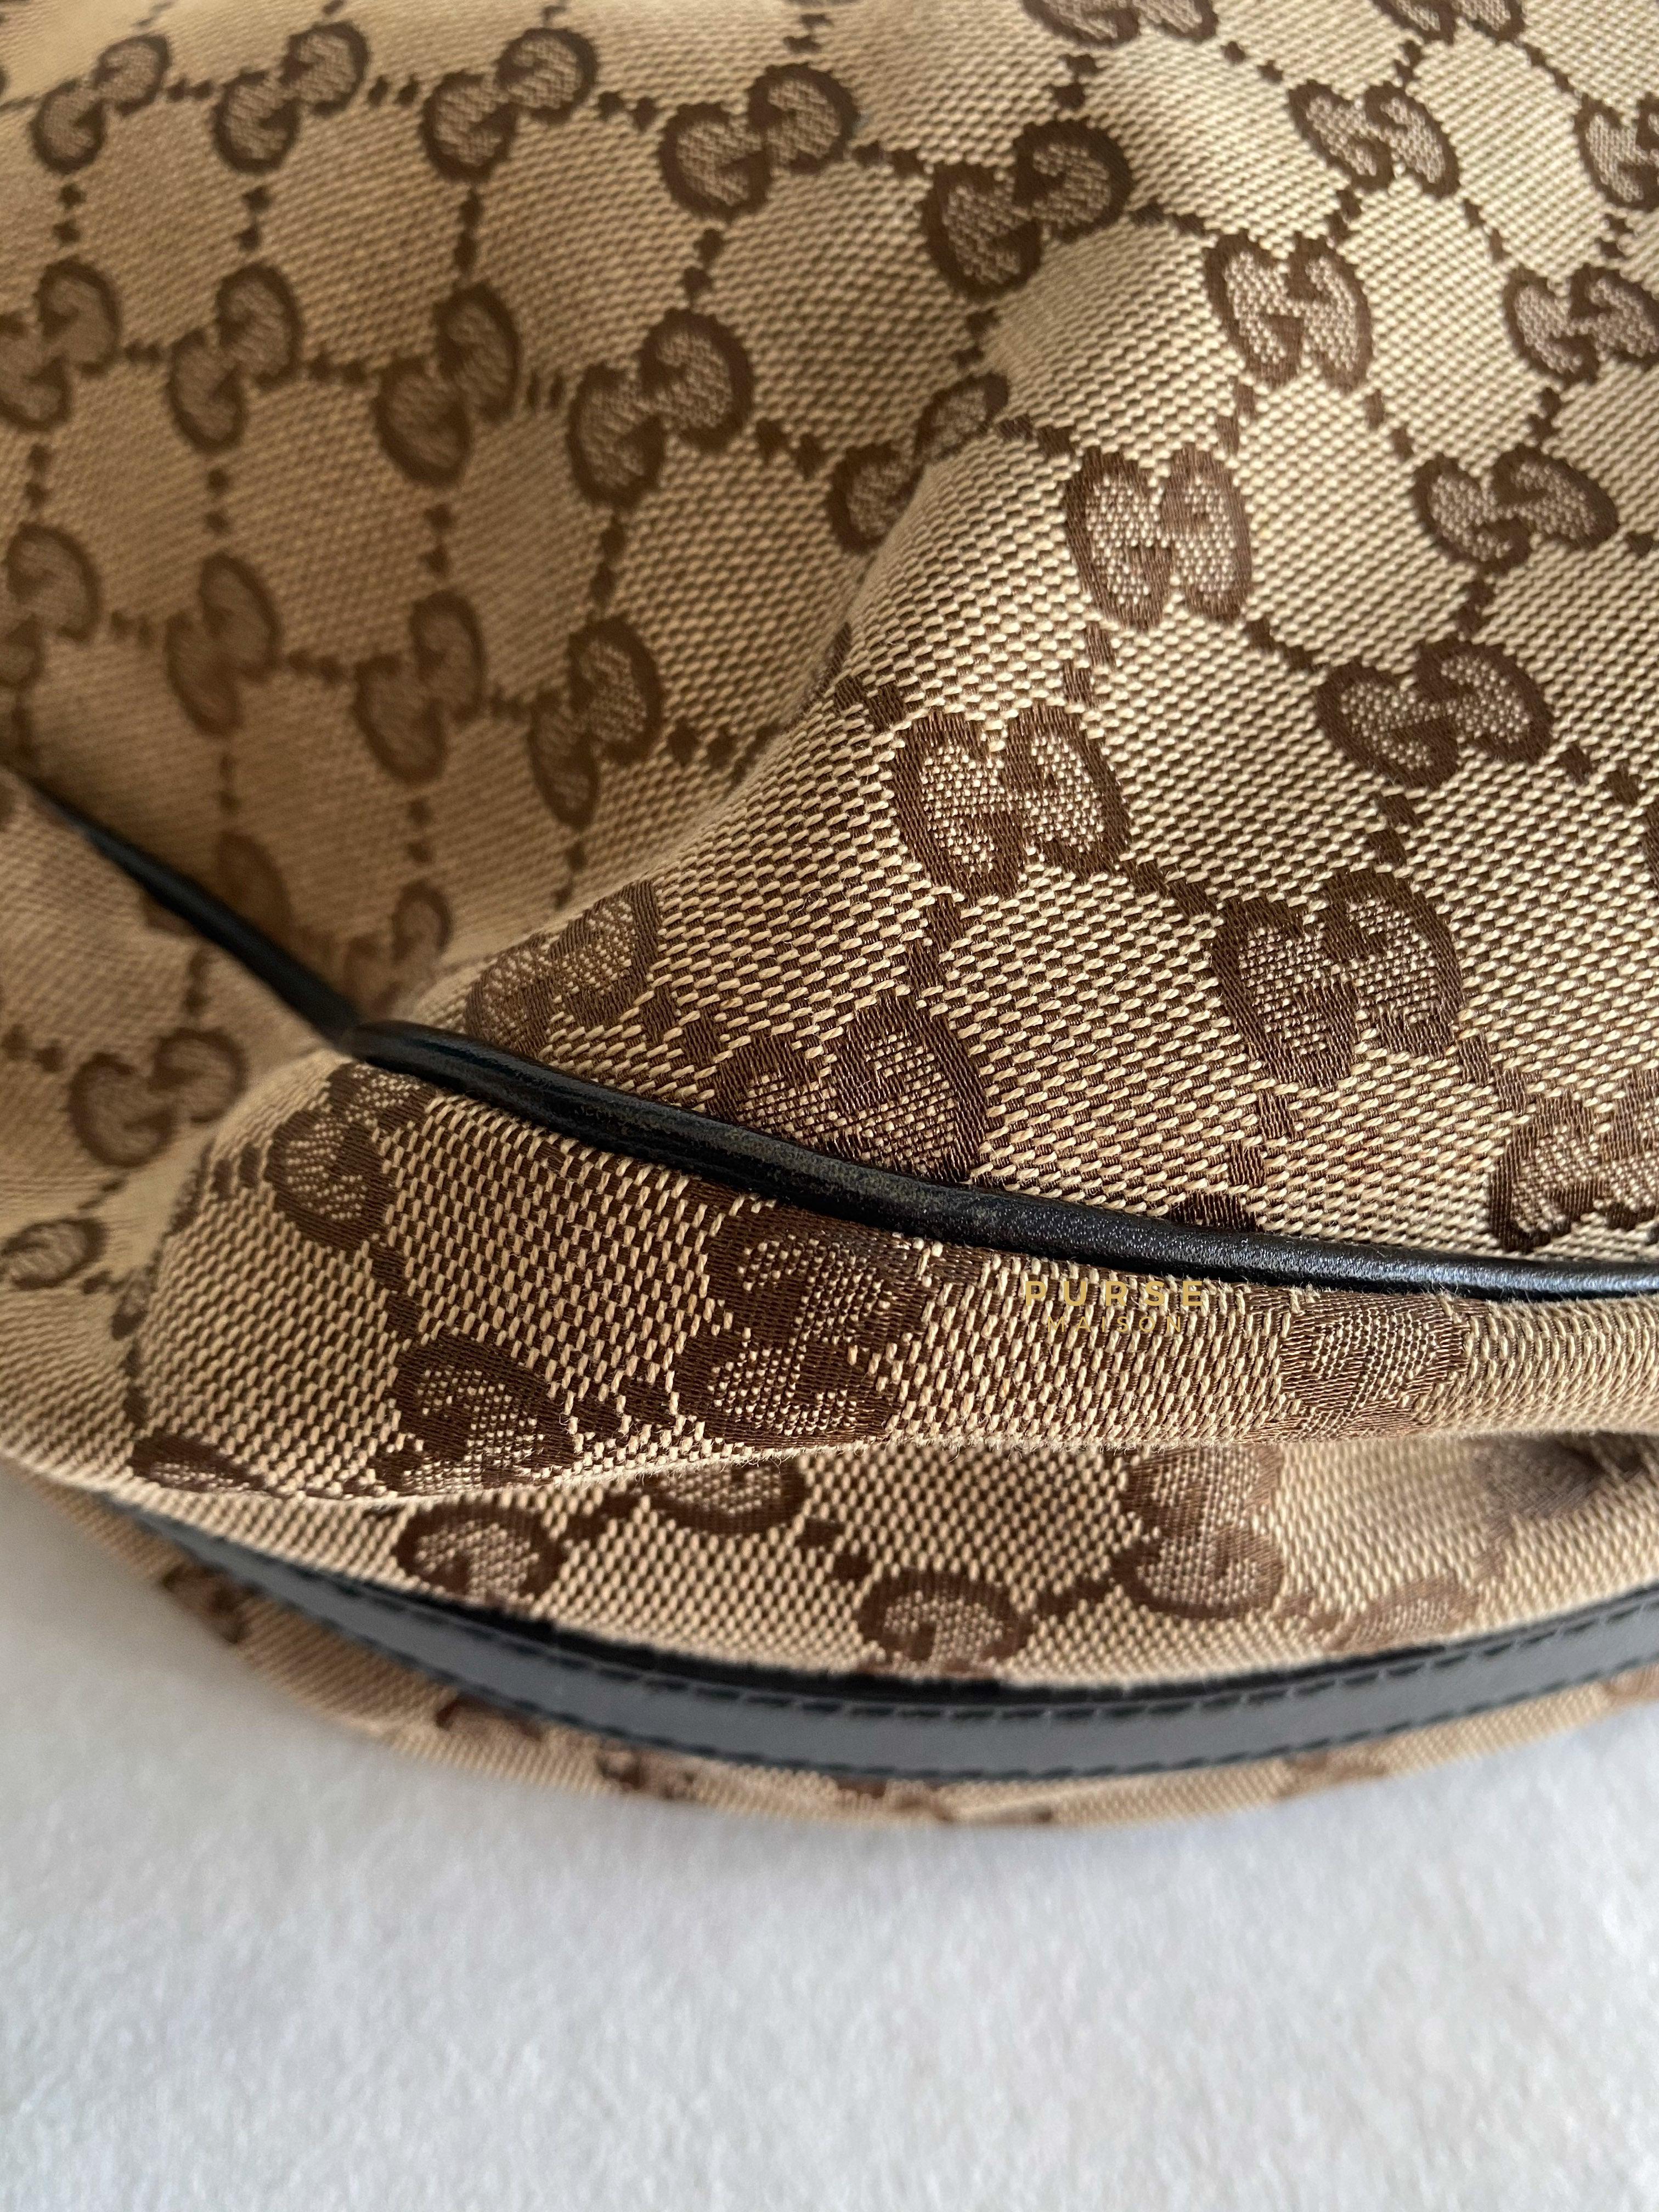 Gucci GG Canvas Beige/Brown Leather Large Hobo Bag | Purse Maison Luxury Bags Shop